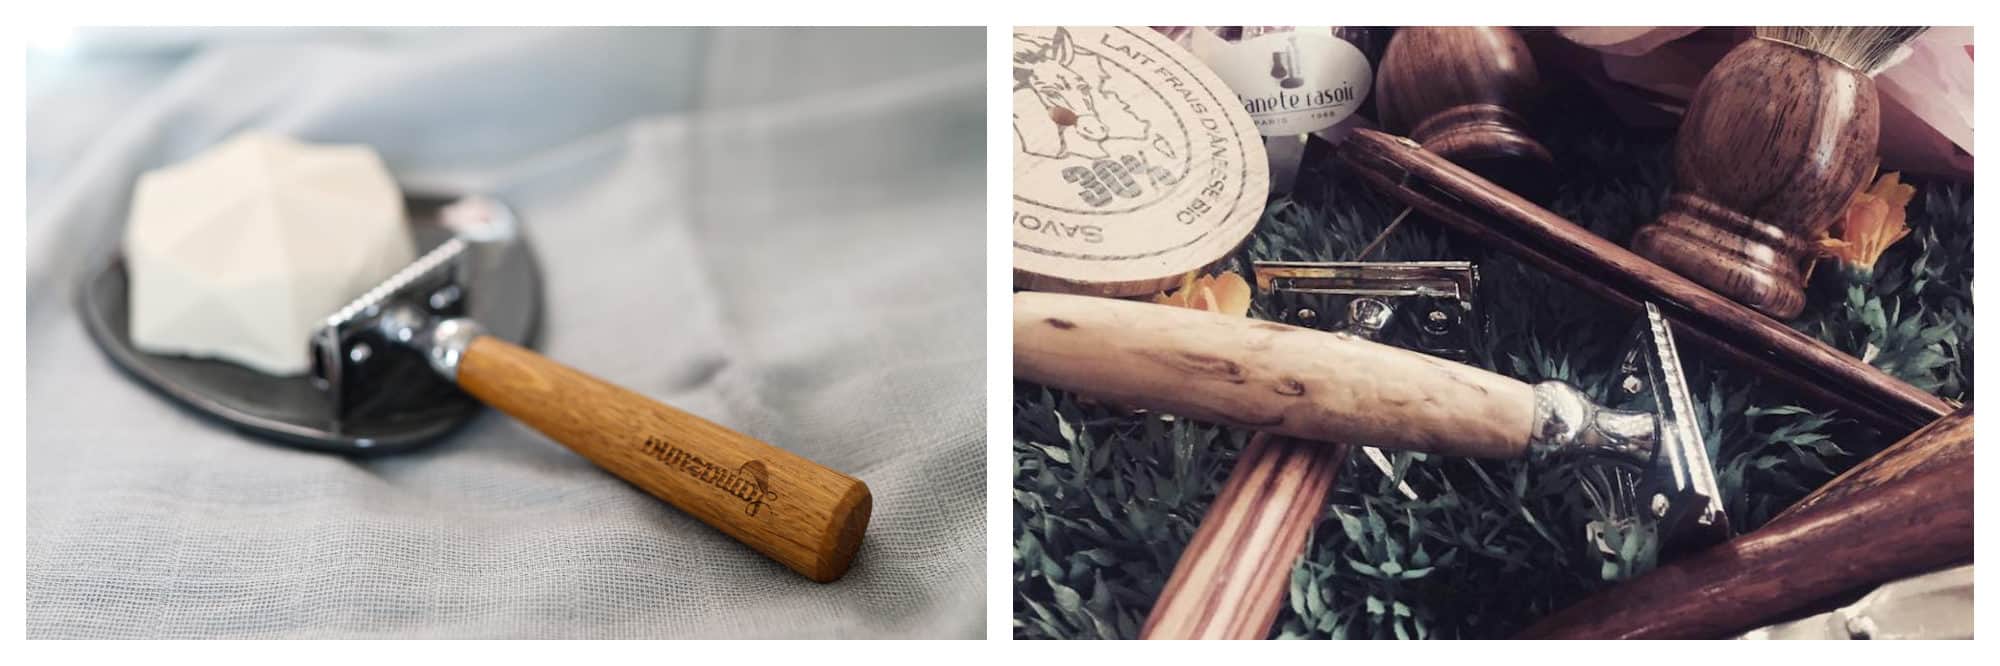 A French brand Lamazuna razor with wooden handle by a block of soap (left) and razors with wooden handles from Planète Rasoir (right).